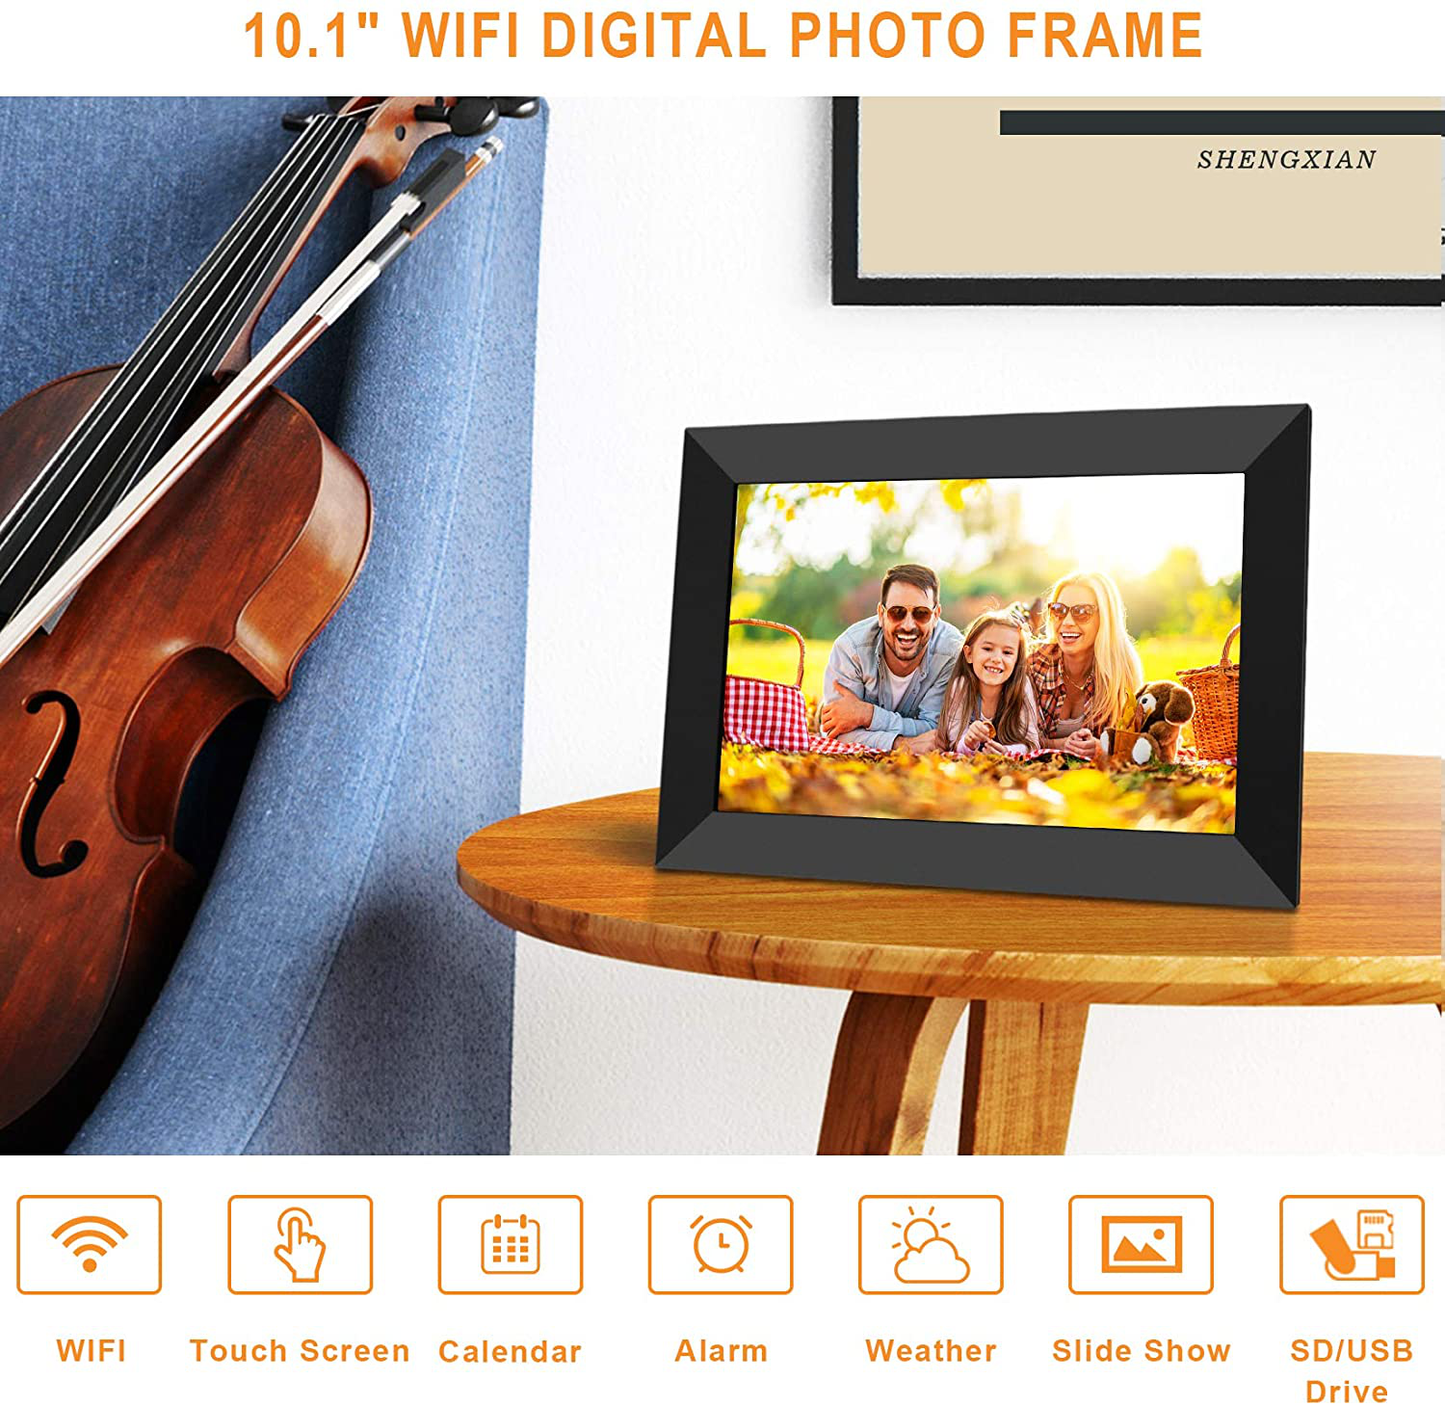 10.1 Inch Wifi Digital Photo Frame, IPS Touch Screen Digital Picture Frame, Supports 1080P, Auto-Rotate, Micro USB/SD Slot, Share Photos and Videos via Ios & Android Ourphoto APP, Email, Cloud